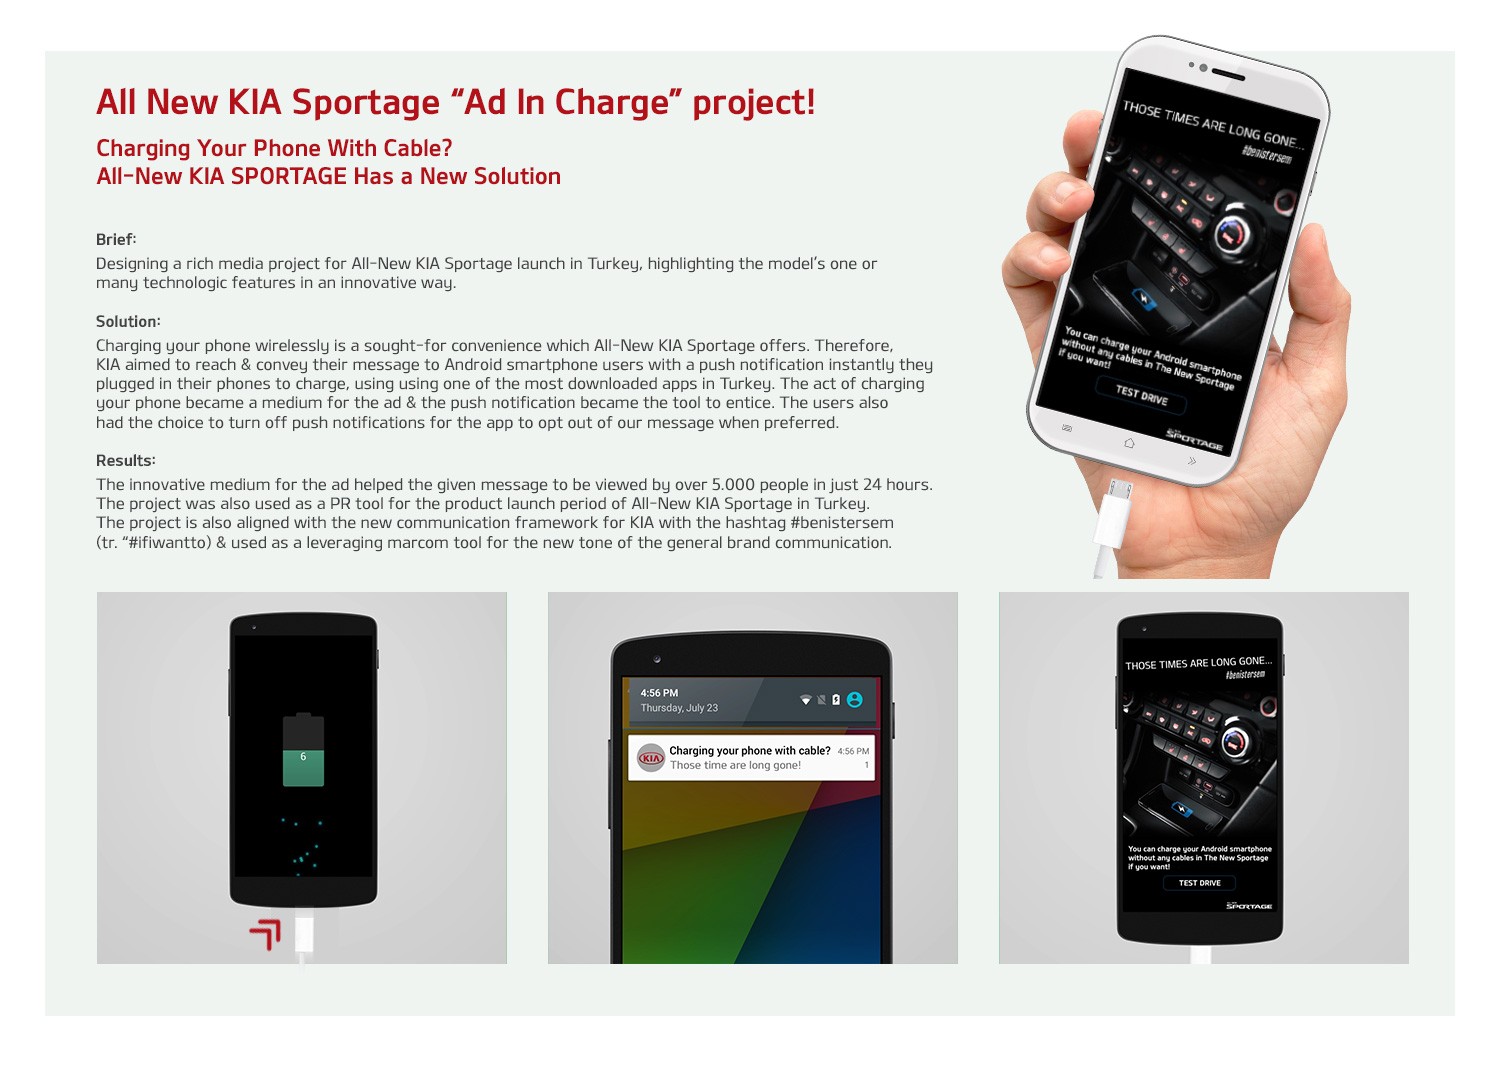 The New KIA Sportage “Ad In Charge” project!